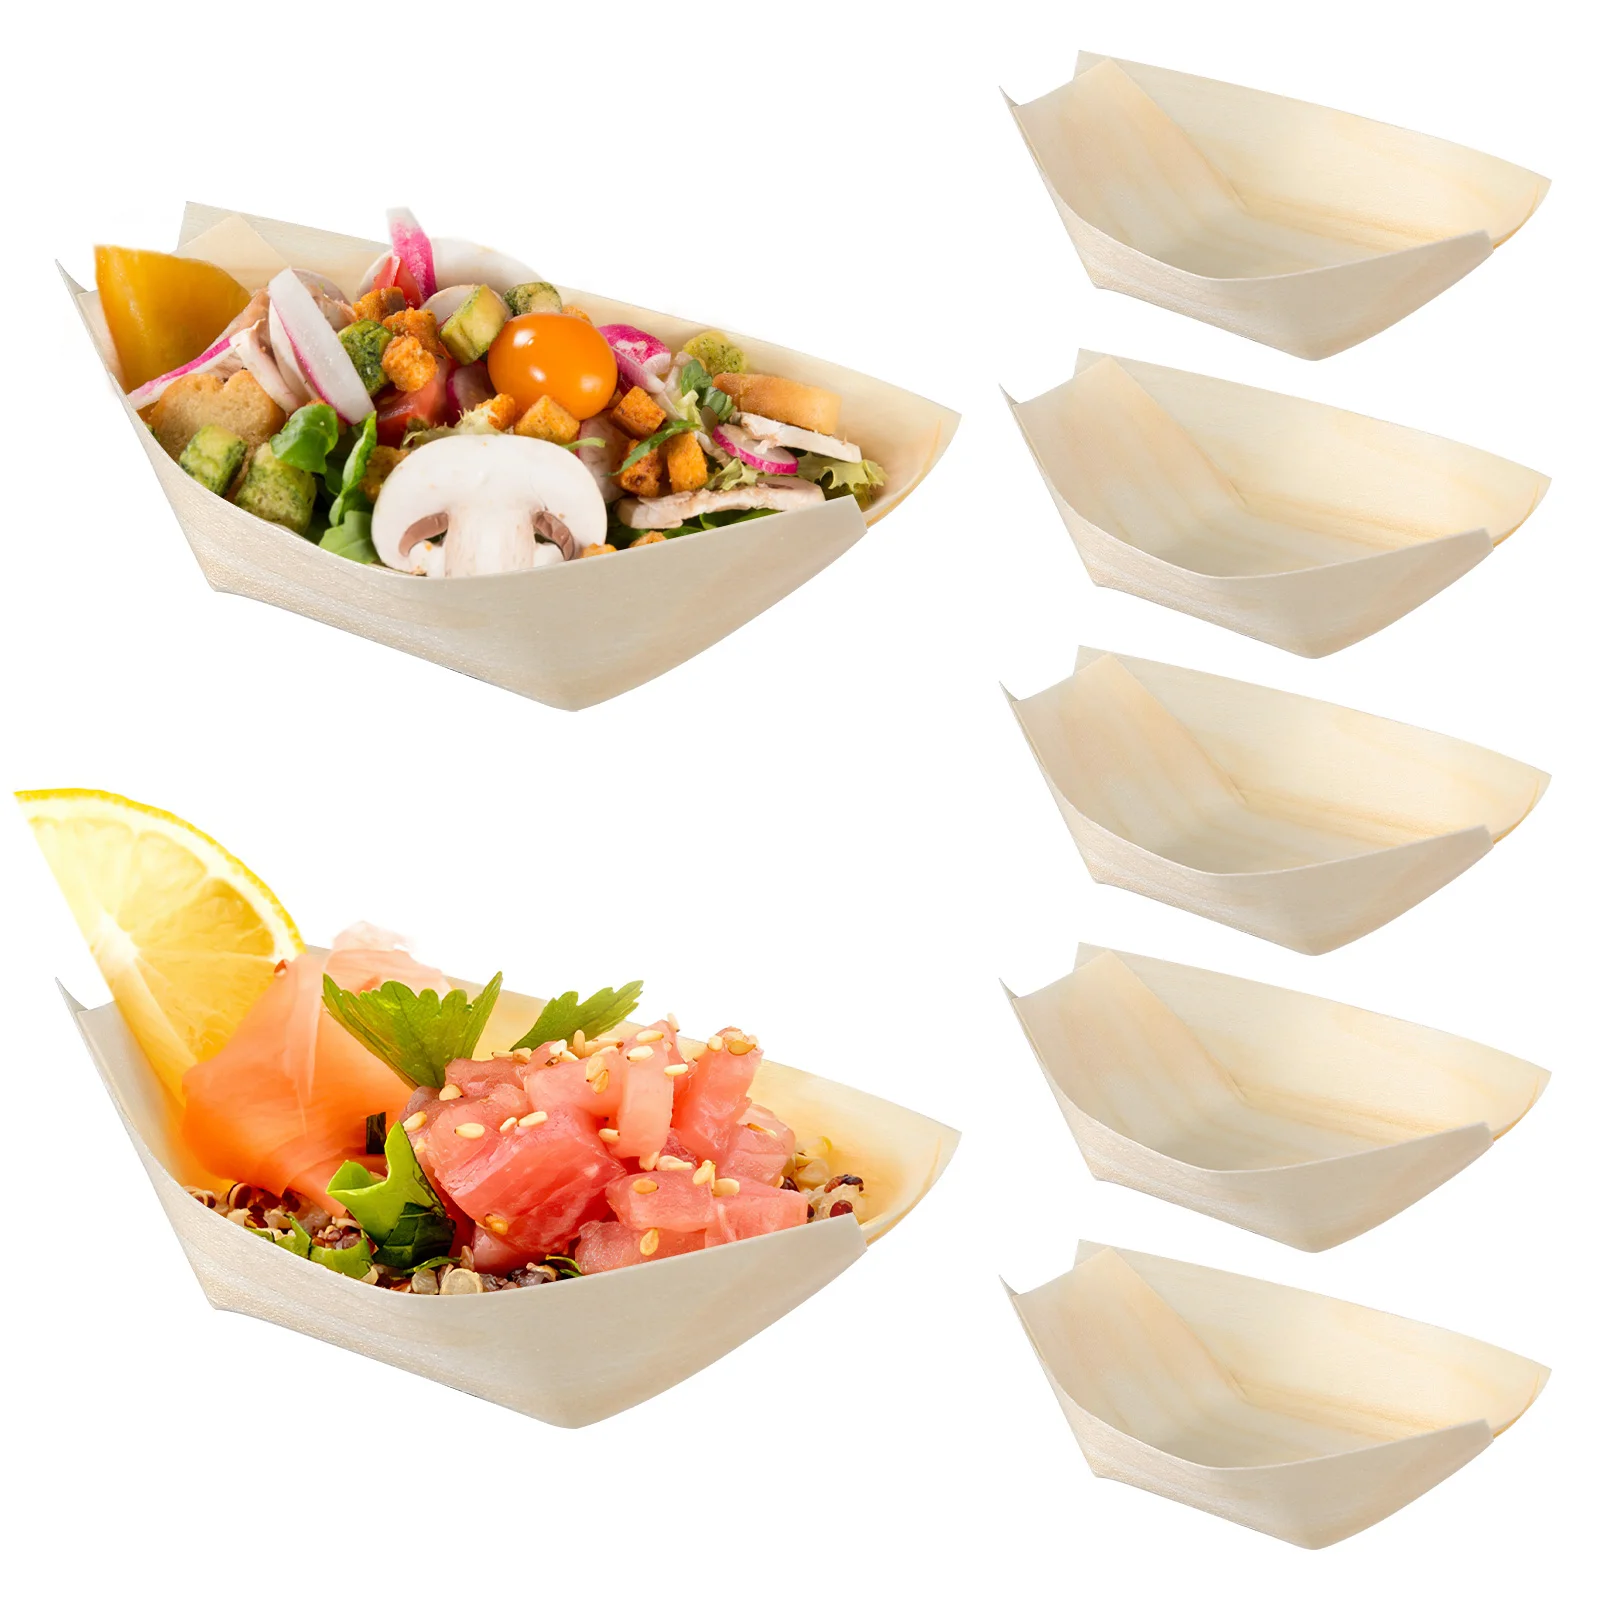 

100 Pcs Disposable Paper Tray Food Charcuterie Serving Utensils Plates Bowls Woodsy Decor Take Out Boats Baskets Trays Cheese